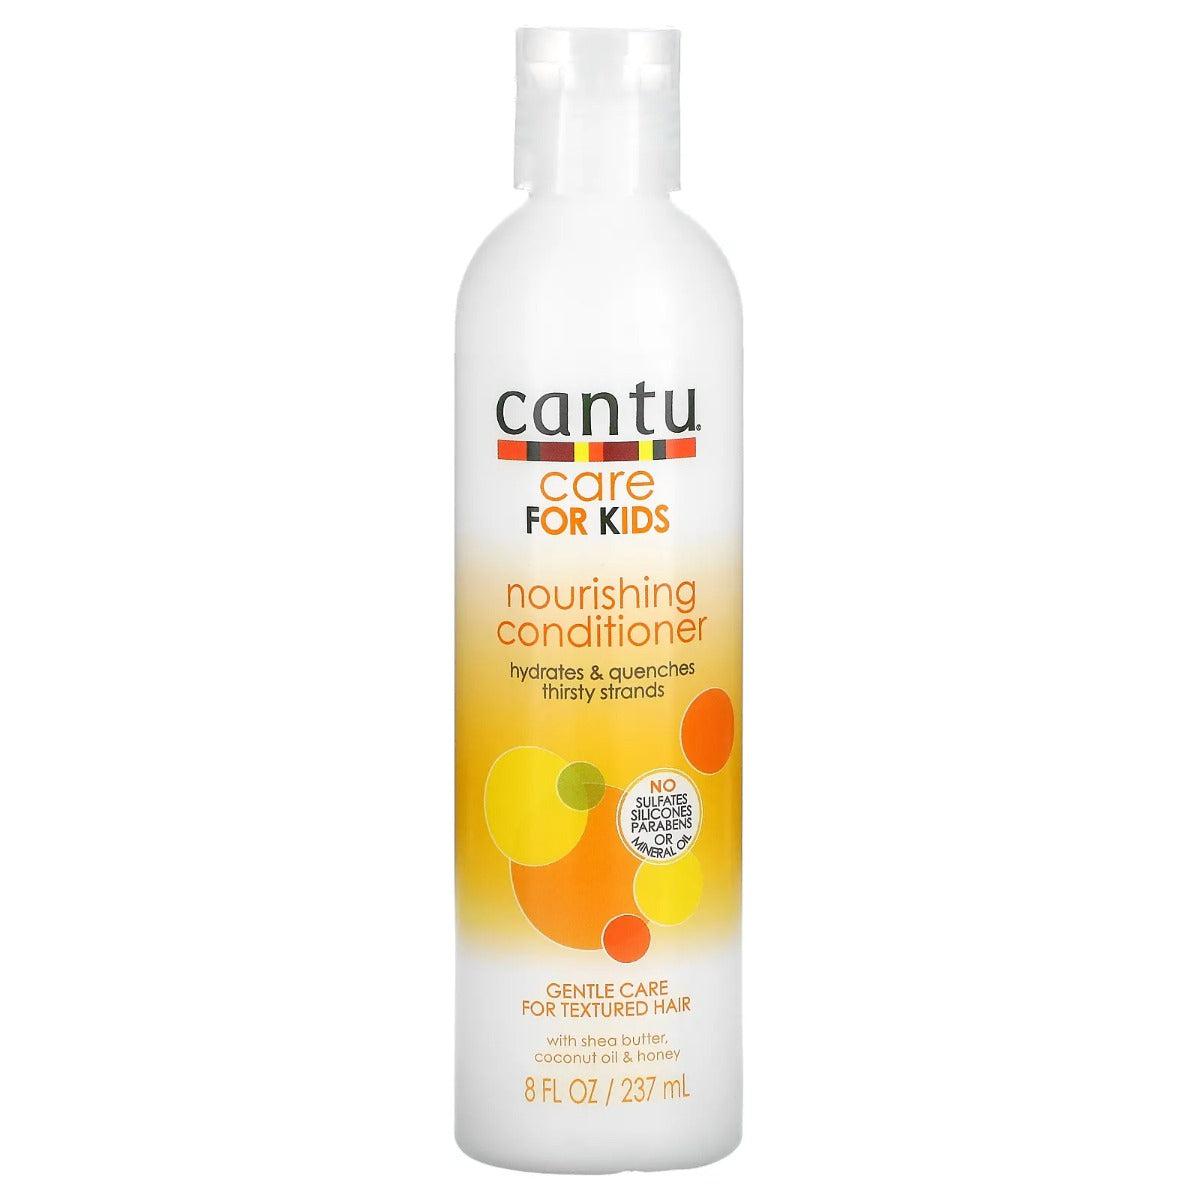 Cantu Care For Kids Tear-Free Nourishing Conditioner Gentle Care for Textured Hair 237 ml